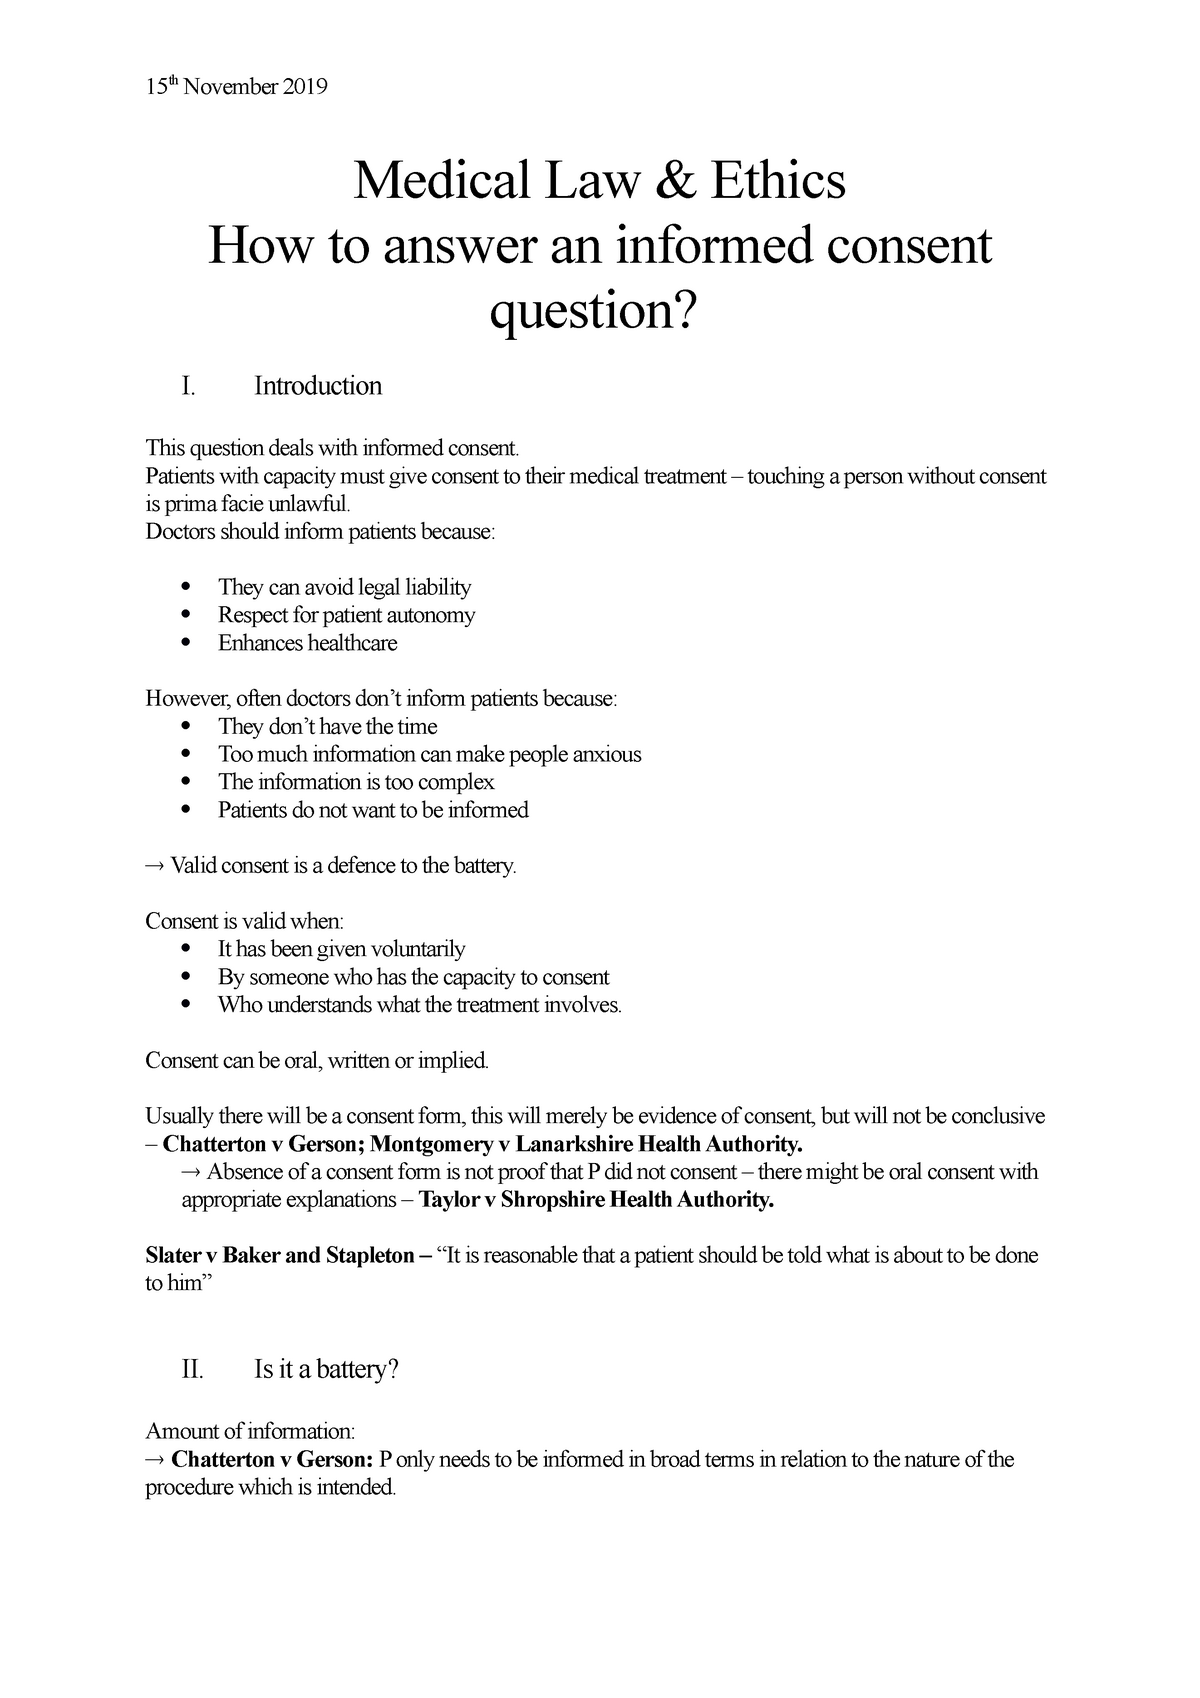 medical-law-ethics-how-to-answer-an-informed-consent-question